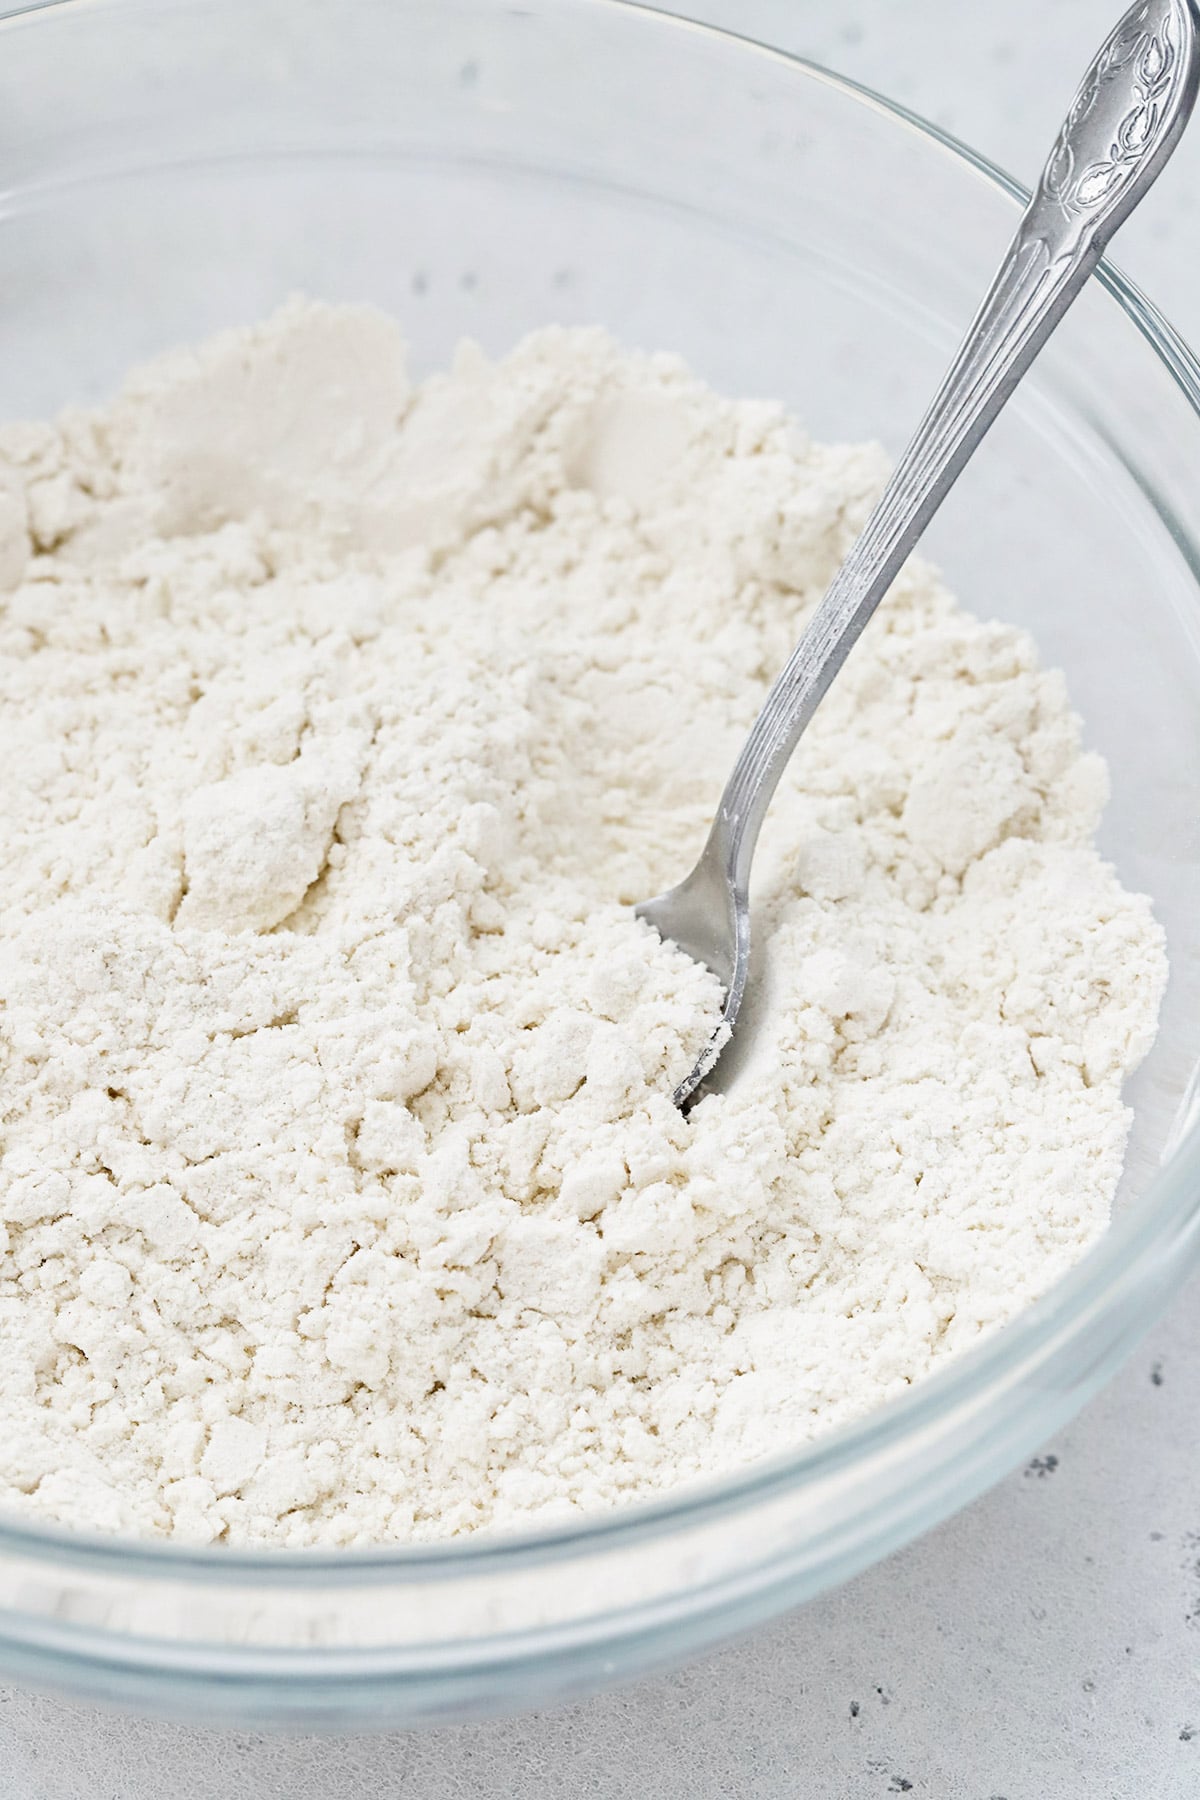 Front view of a spoon in a bowl of flour